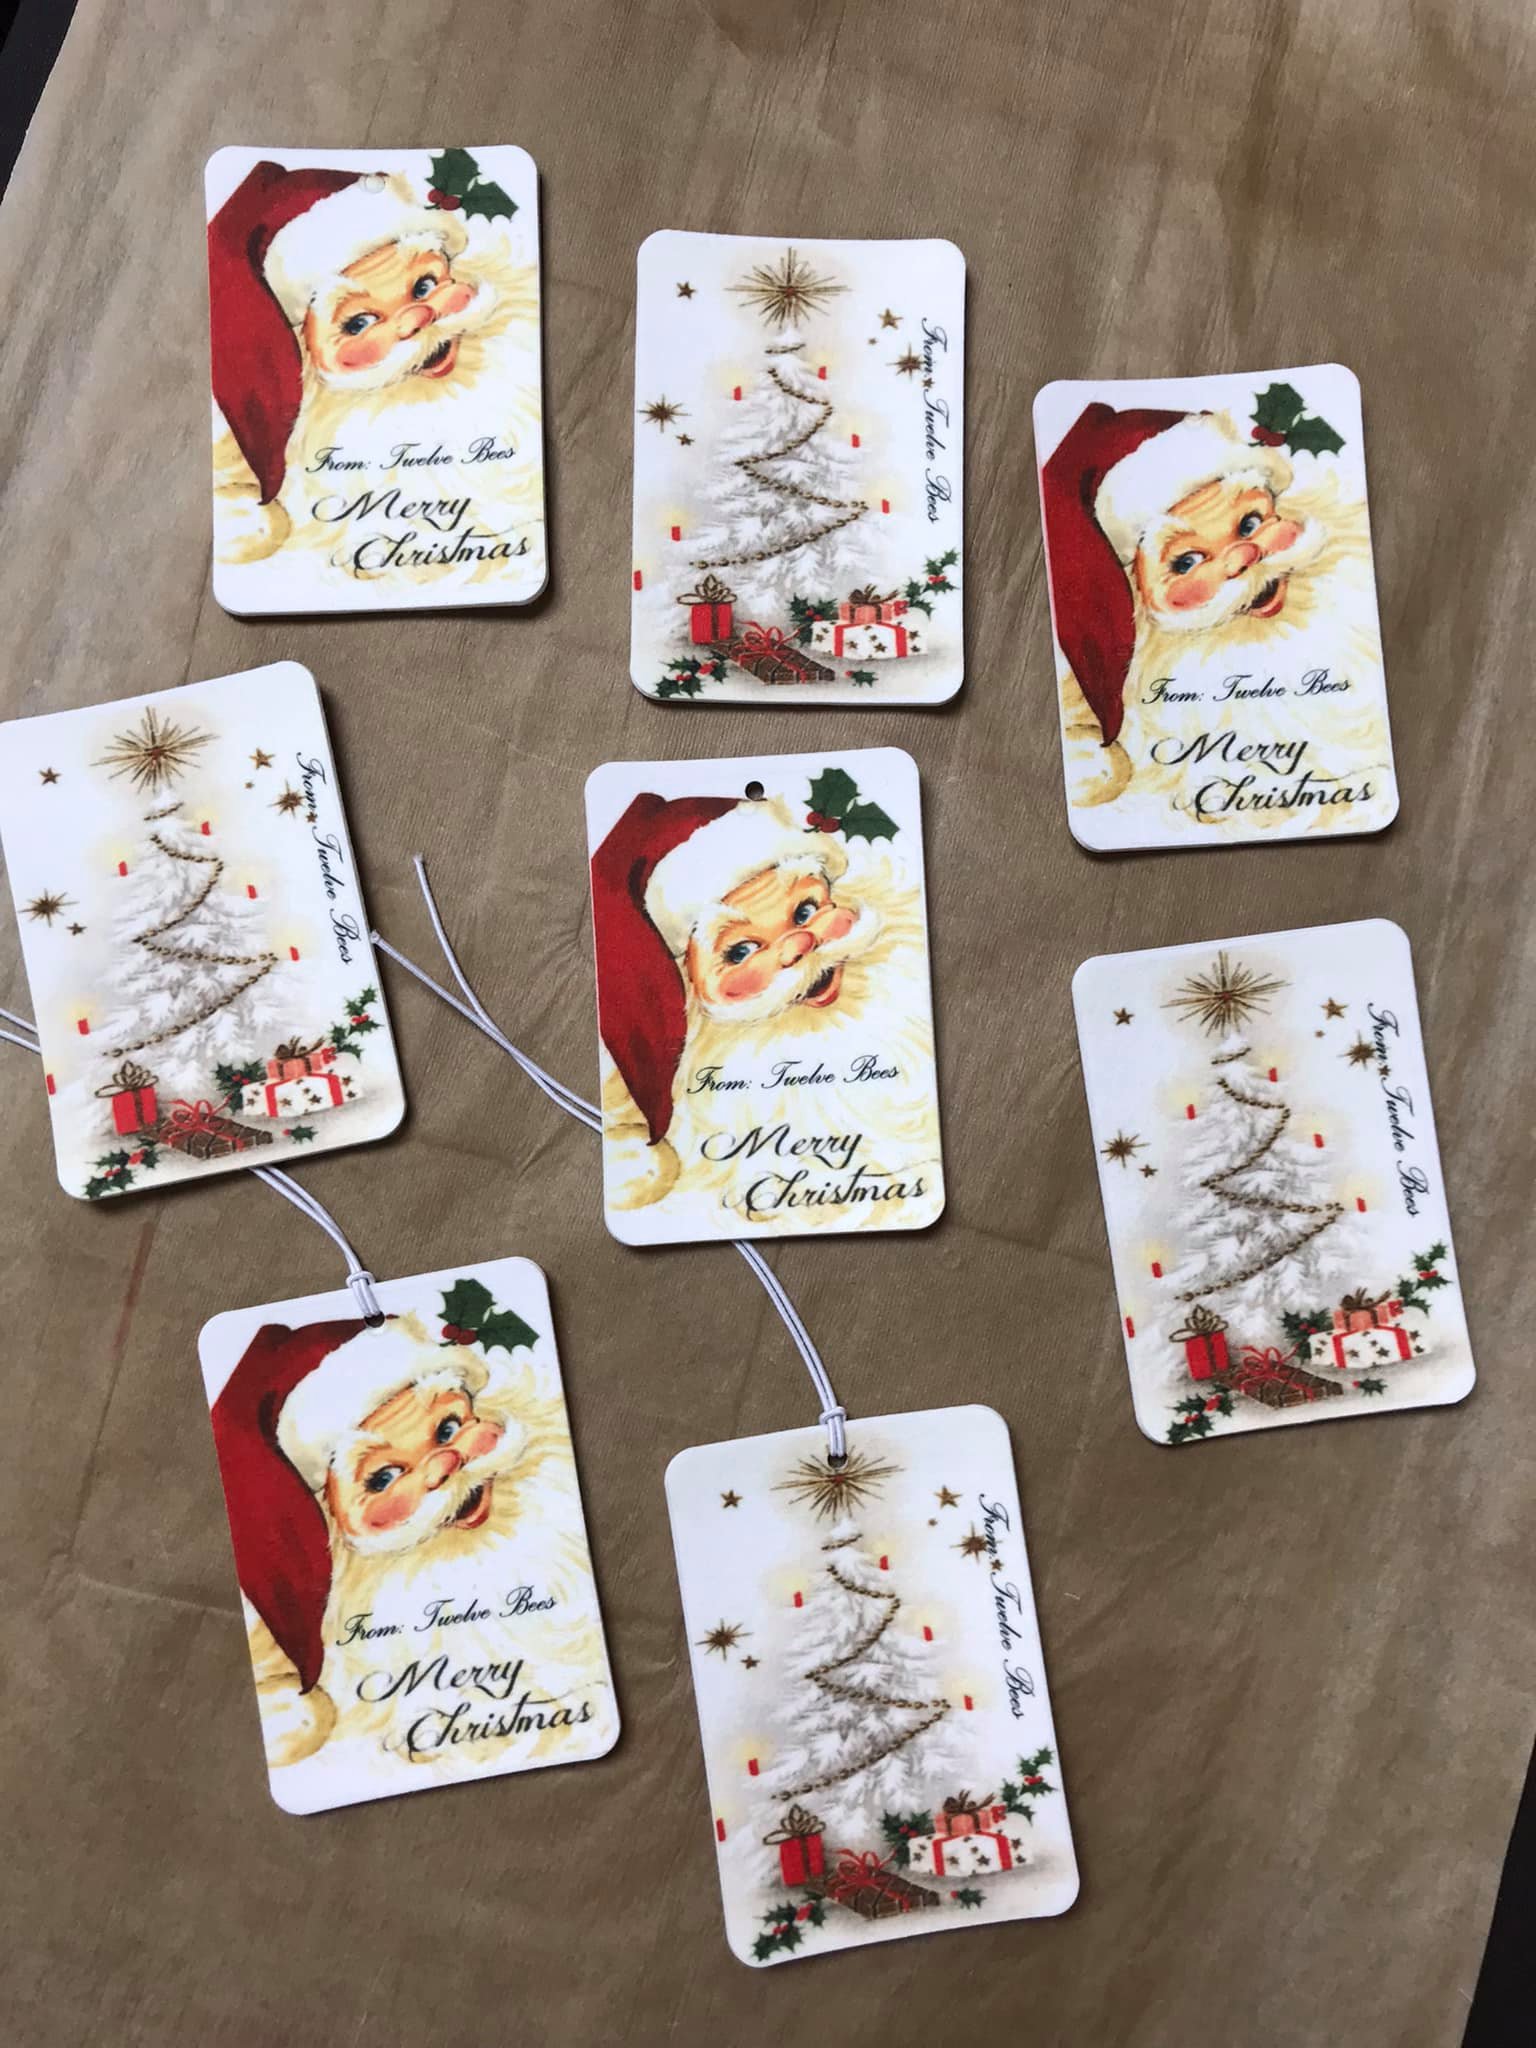 Air Fresheners Made Great Gift Tags - From our Company to our Customer 